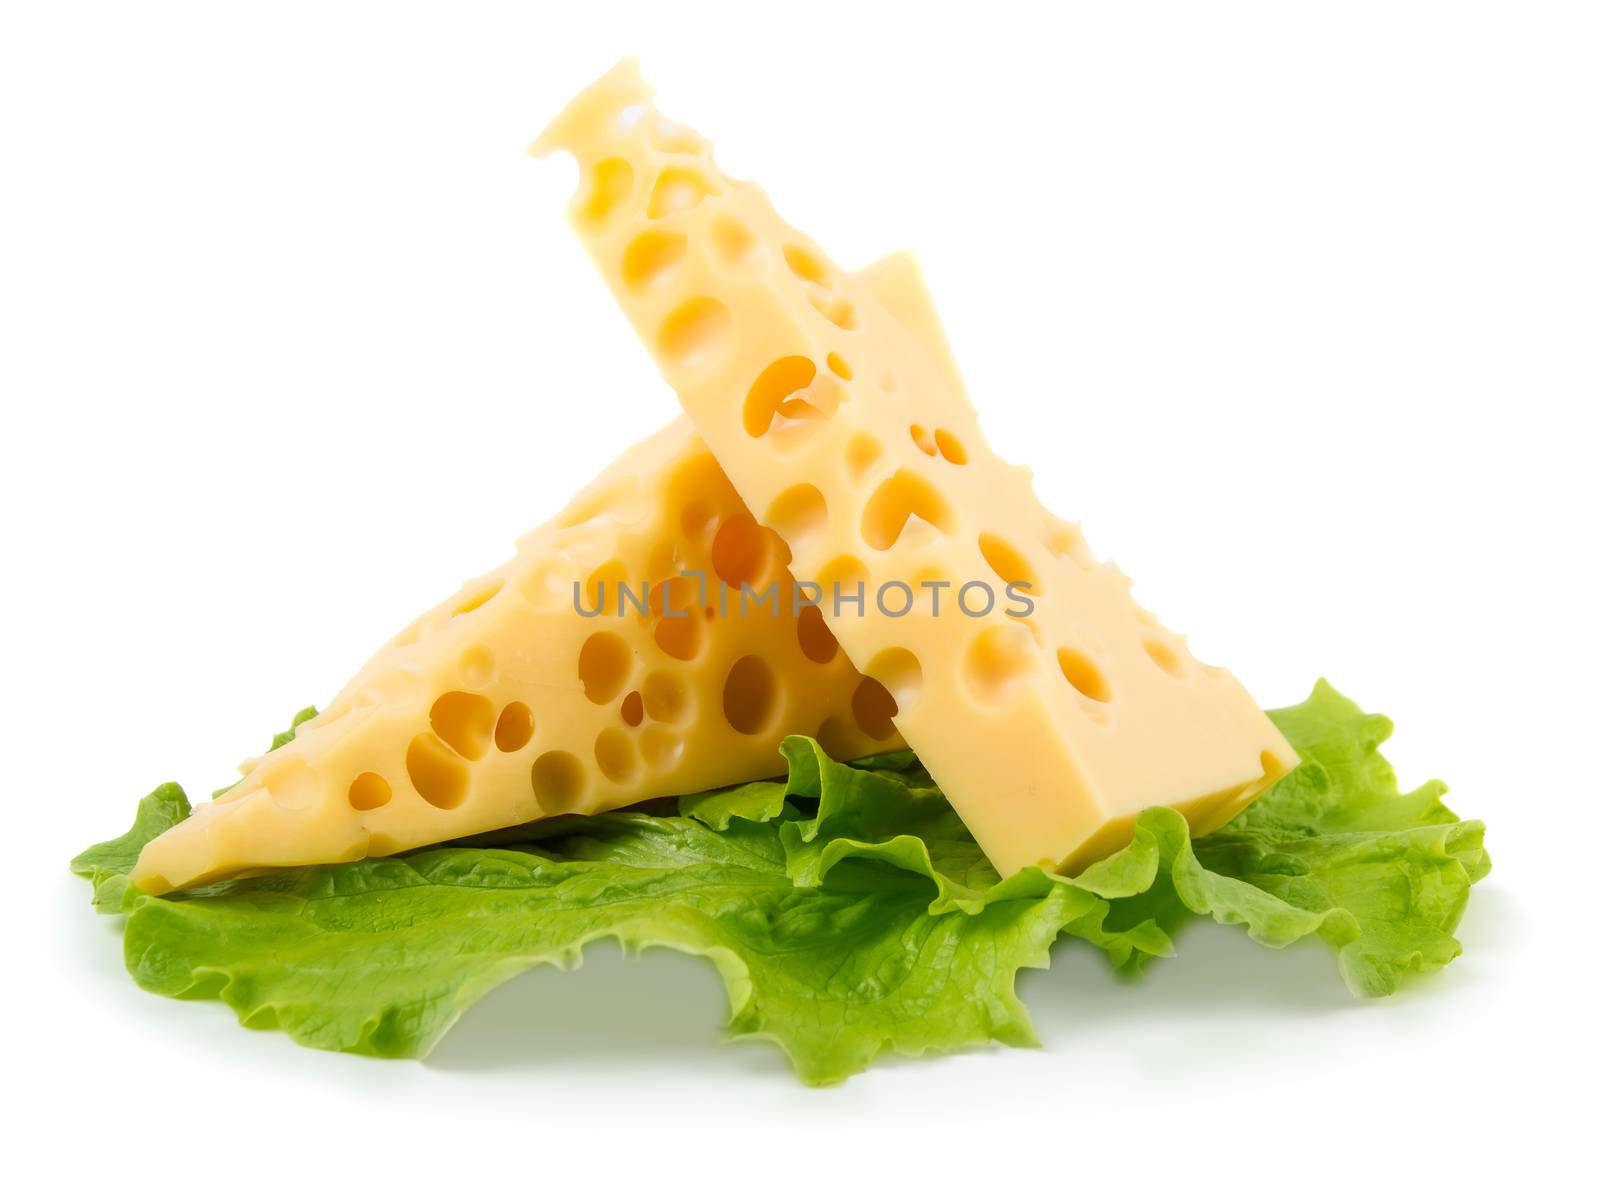 Cheese with green herb isolated on white background